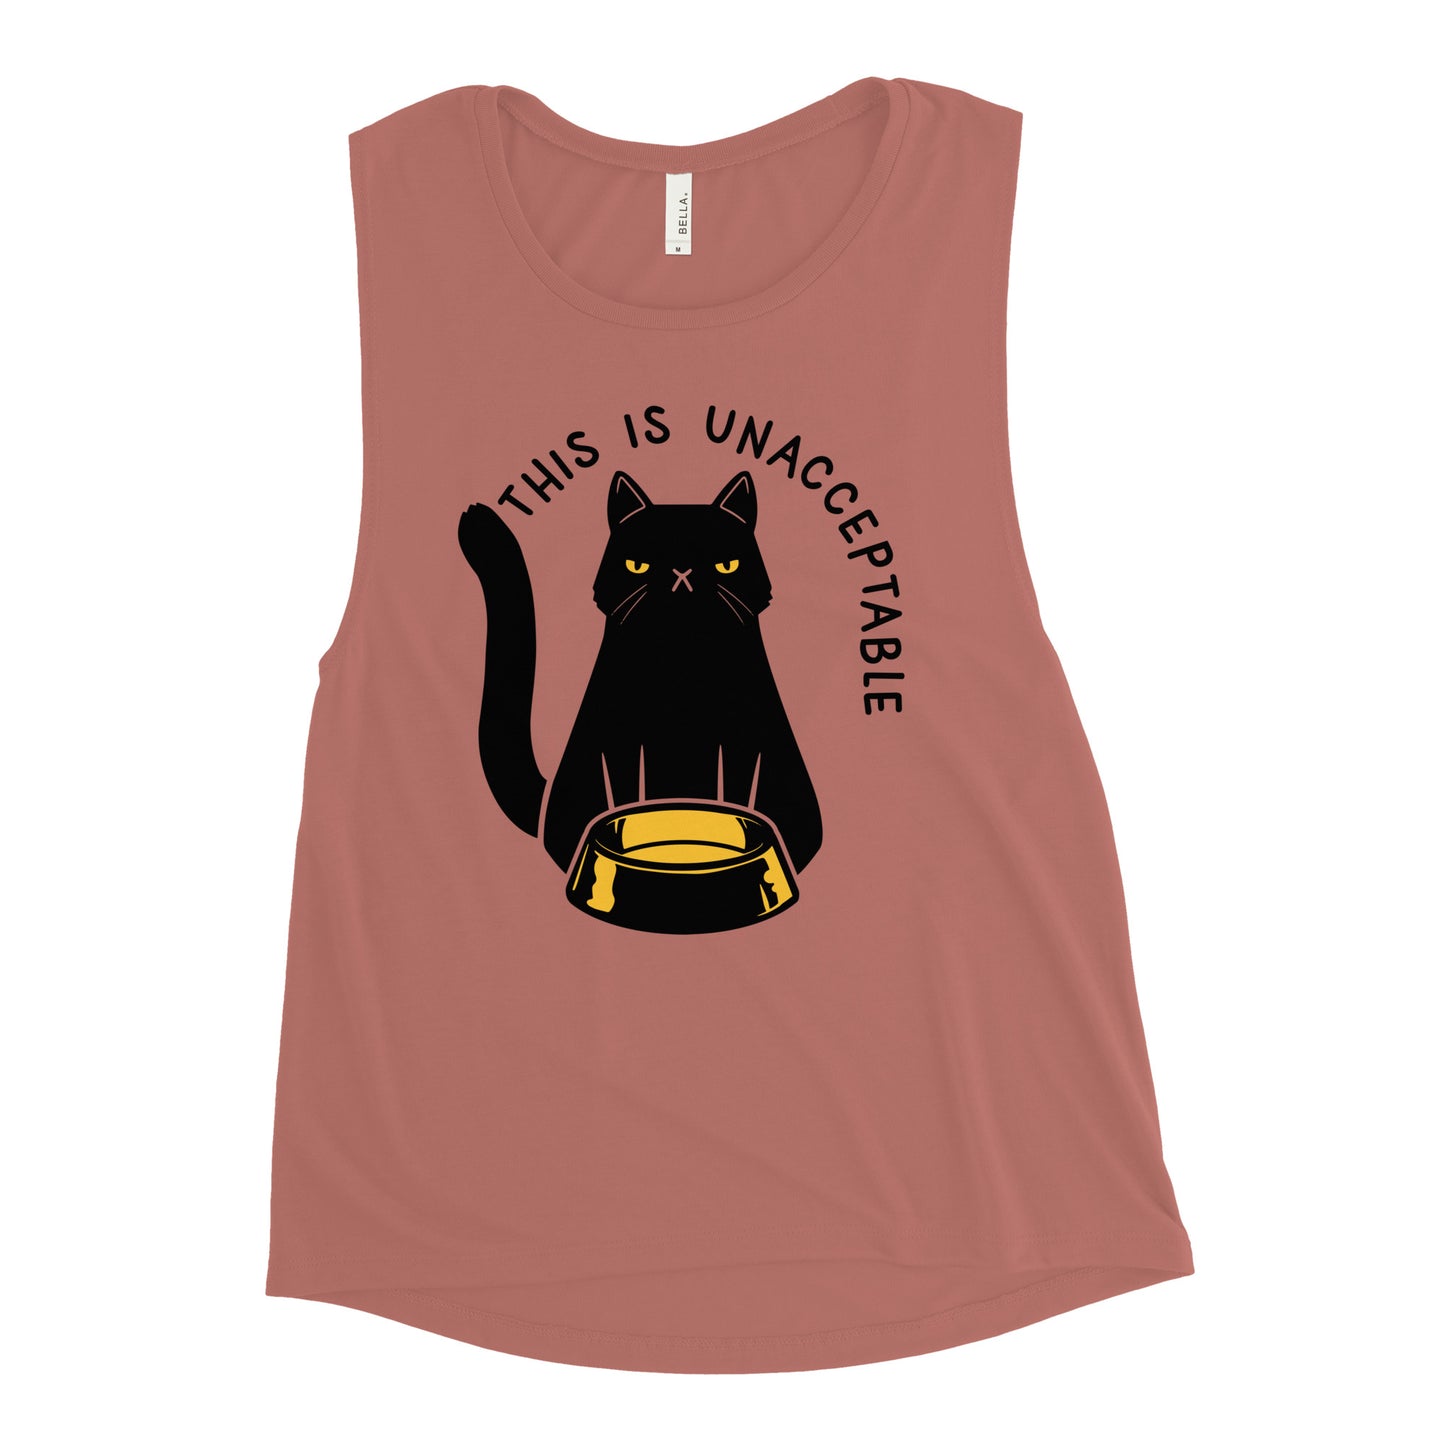 This Is Unacceptable Women's Muscle Tank